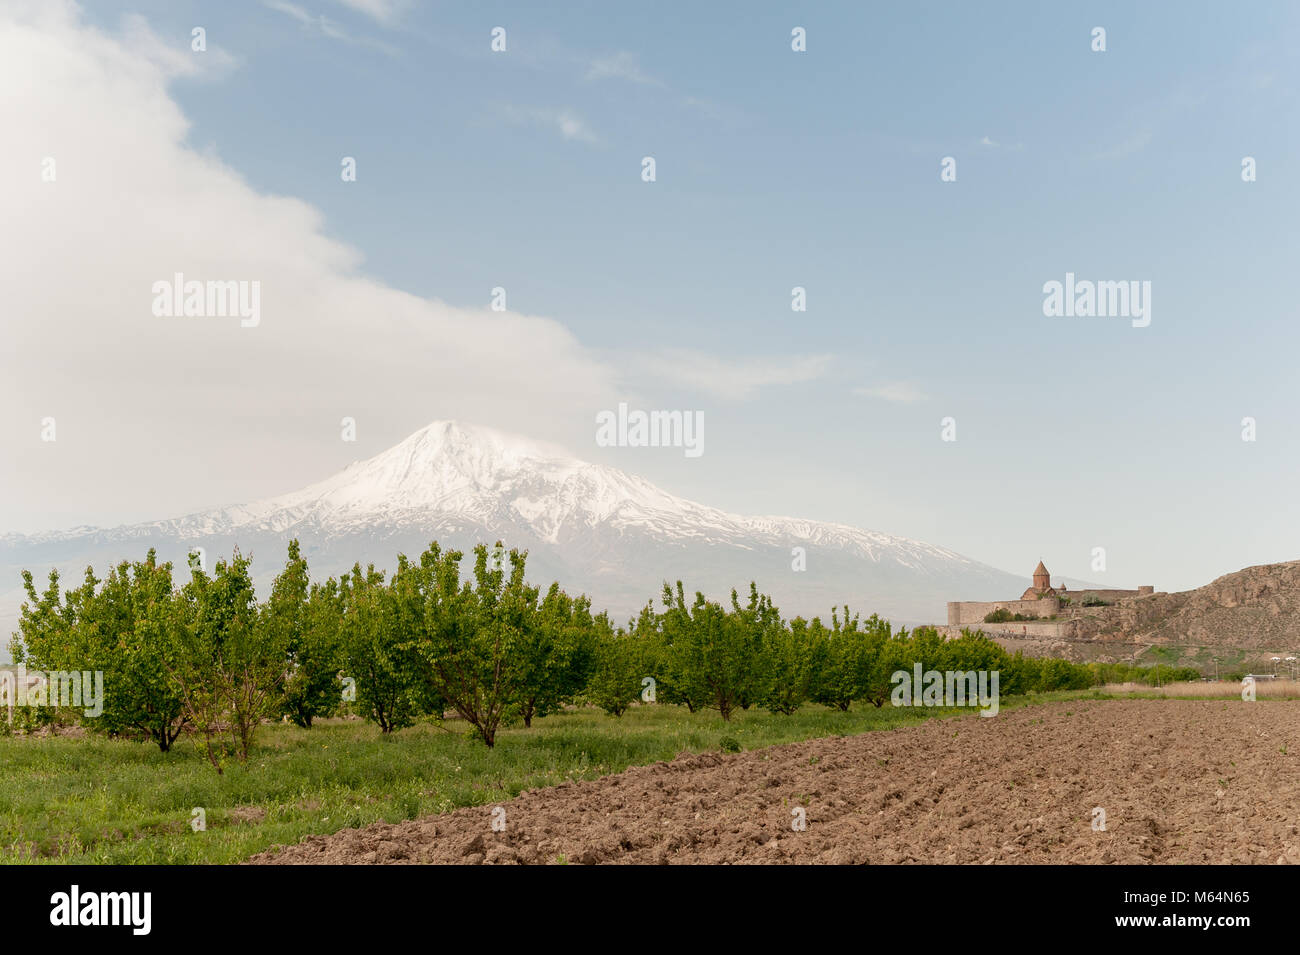 Apricot orchard at the foot ot the Khor Virap monastery in Armenia. Stock Photo